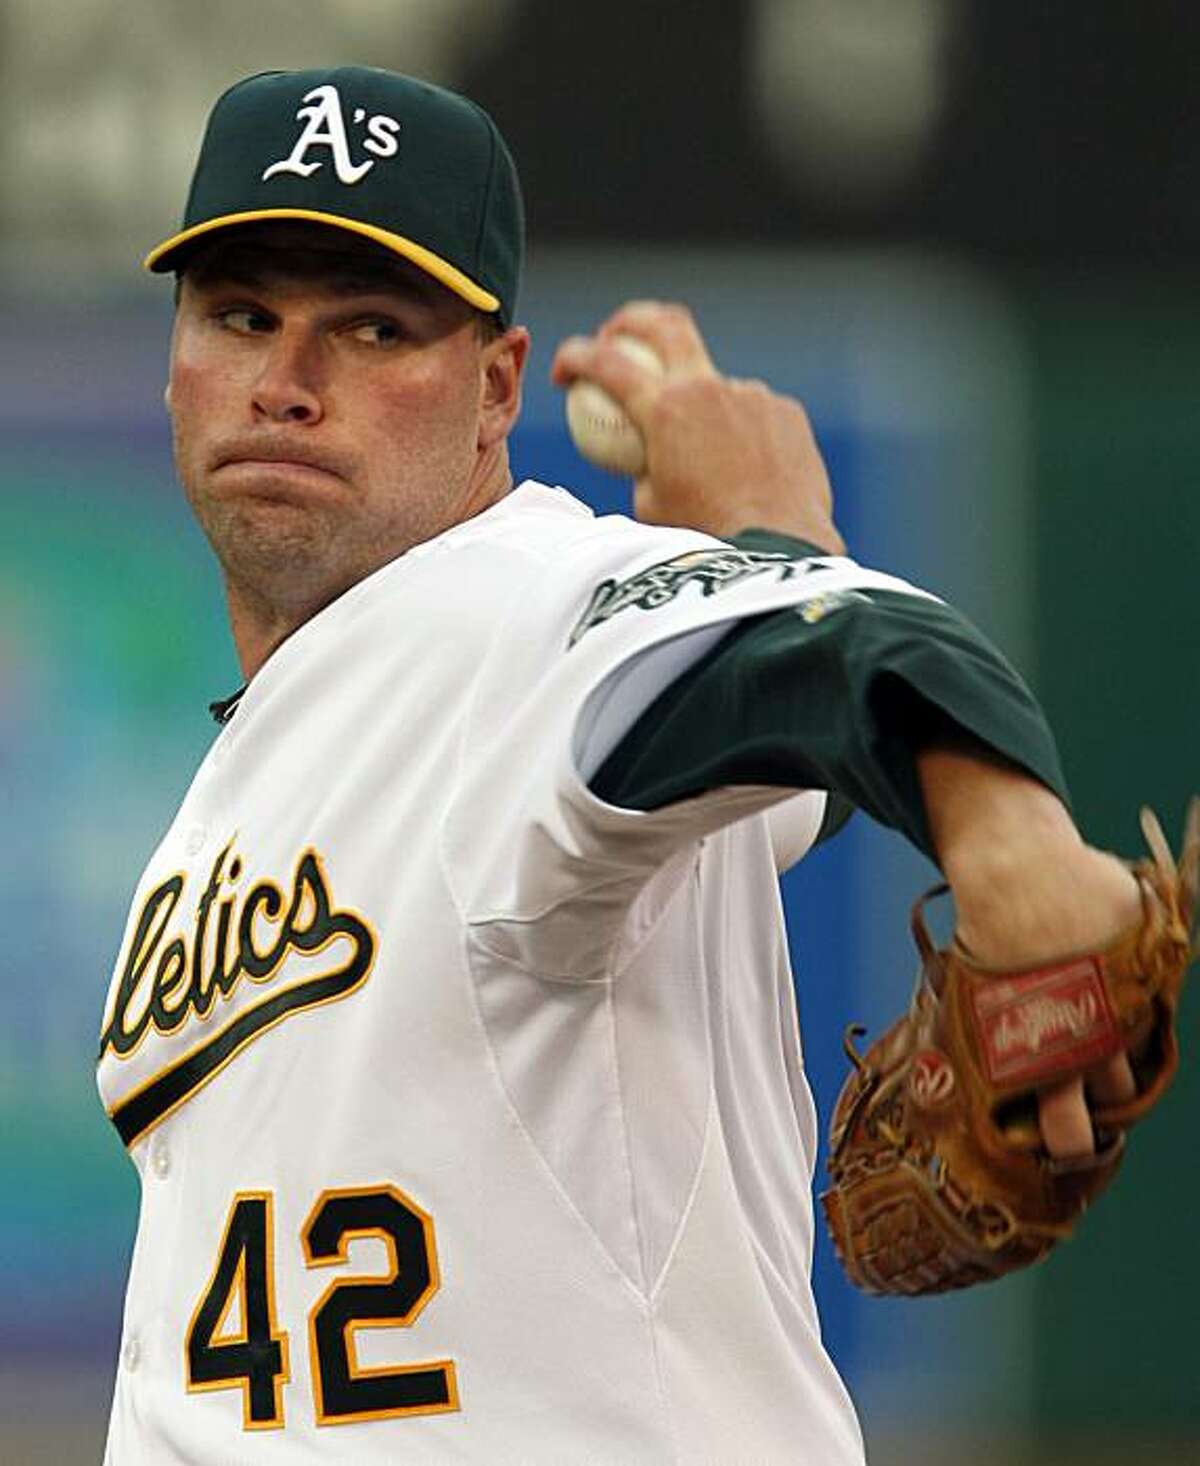 Oakland Athletics' Ben Sheets works against the Baltimore Orioles during the first inning of a baseball game Thursday, April 15, 2010, in Oakland, Calif.